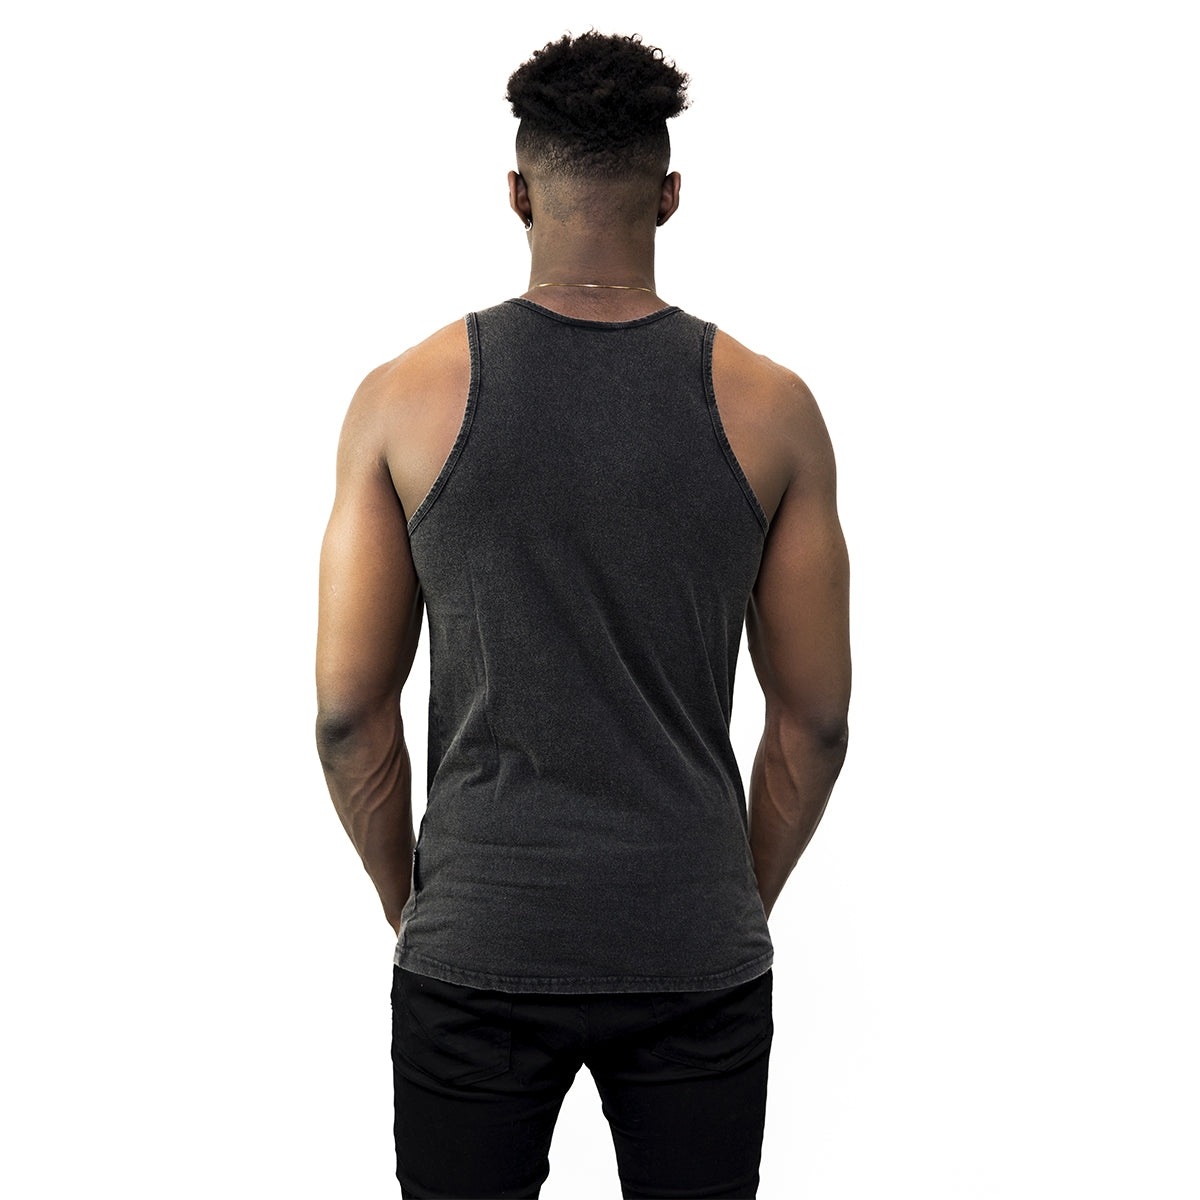 A man wearing a Guinness Washed Extra Stout Tank Top, perfect for the summer months.